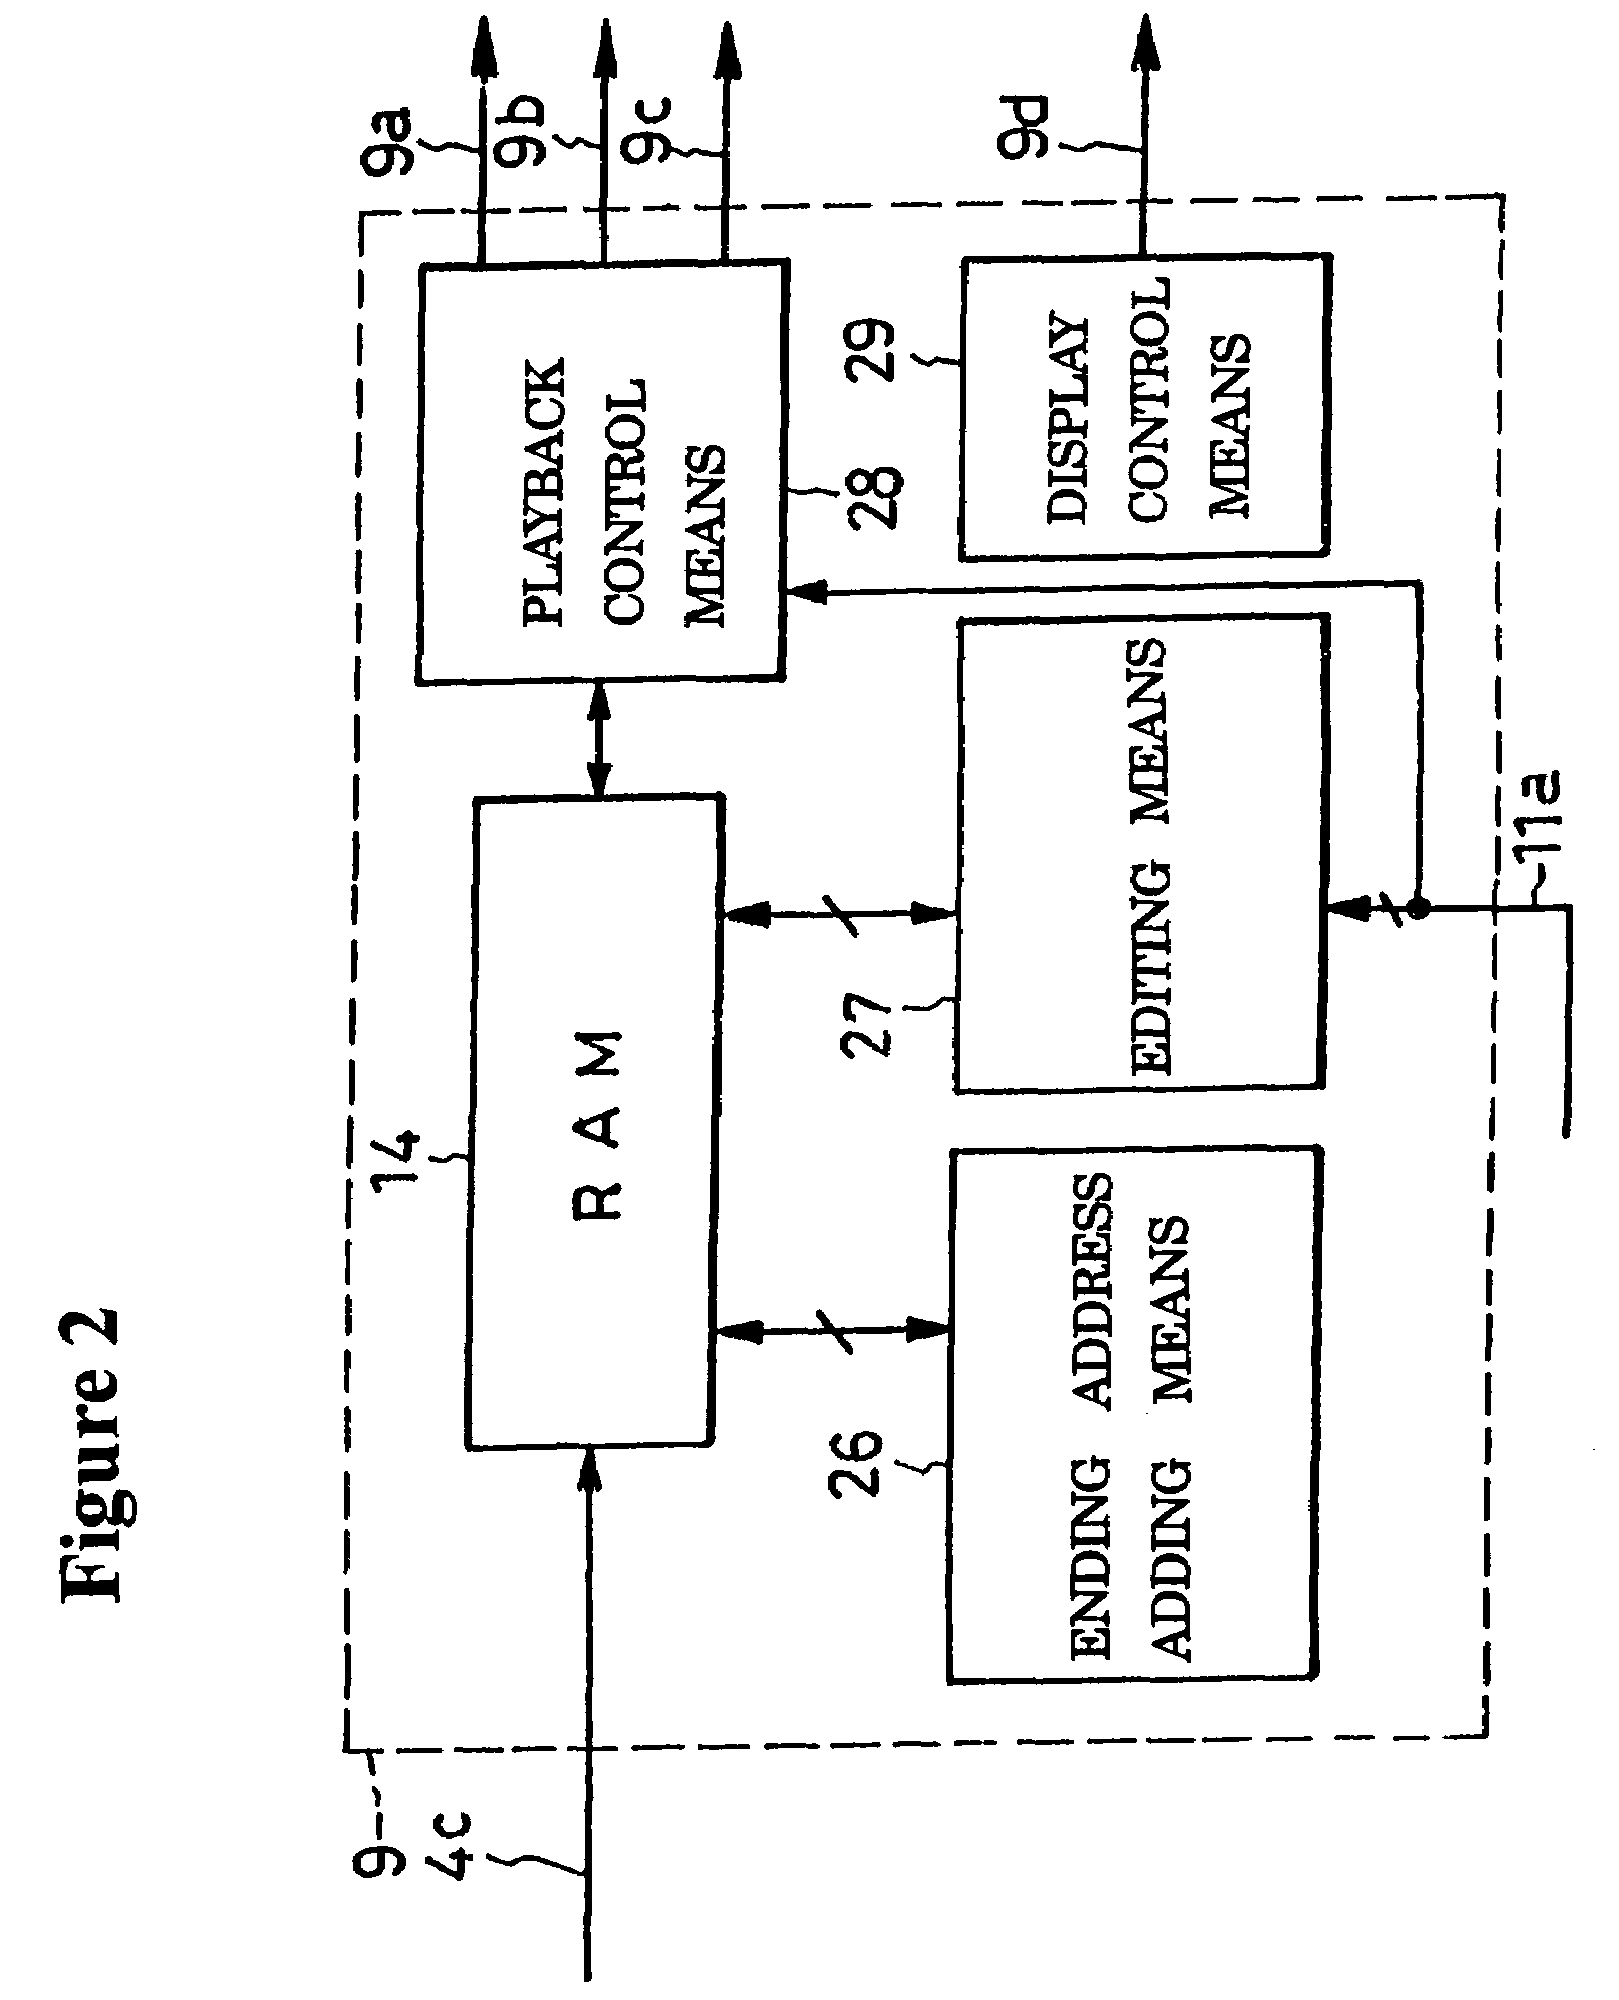 Apparatus for playback of data storage disks